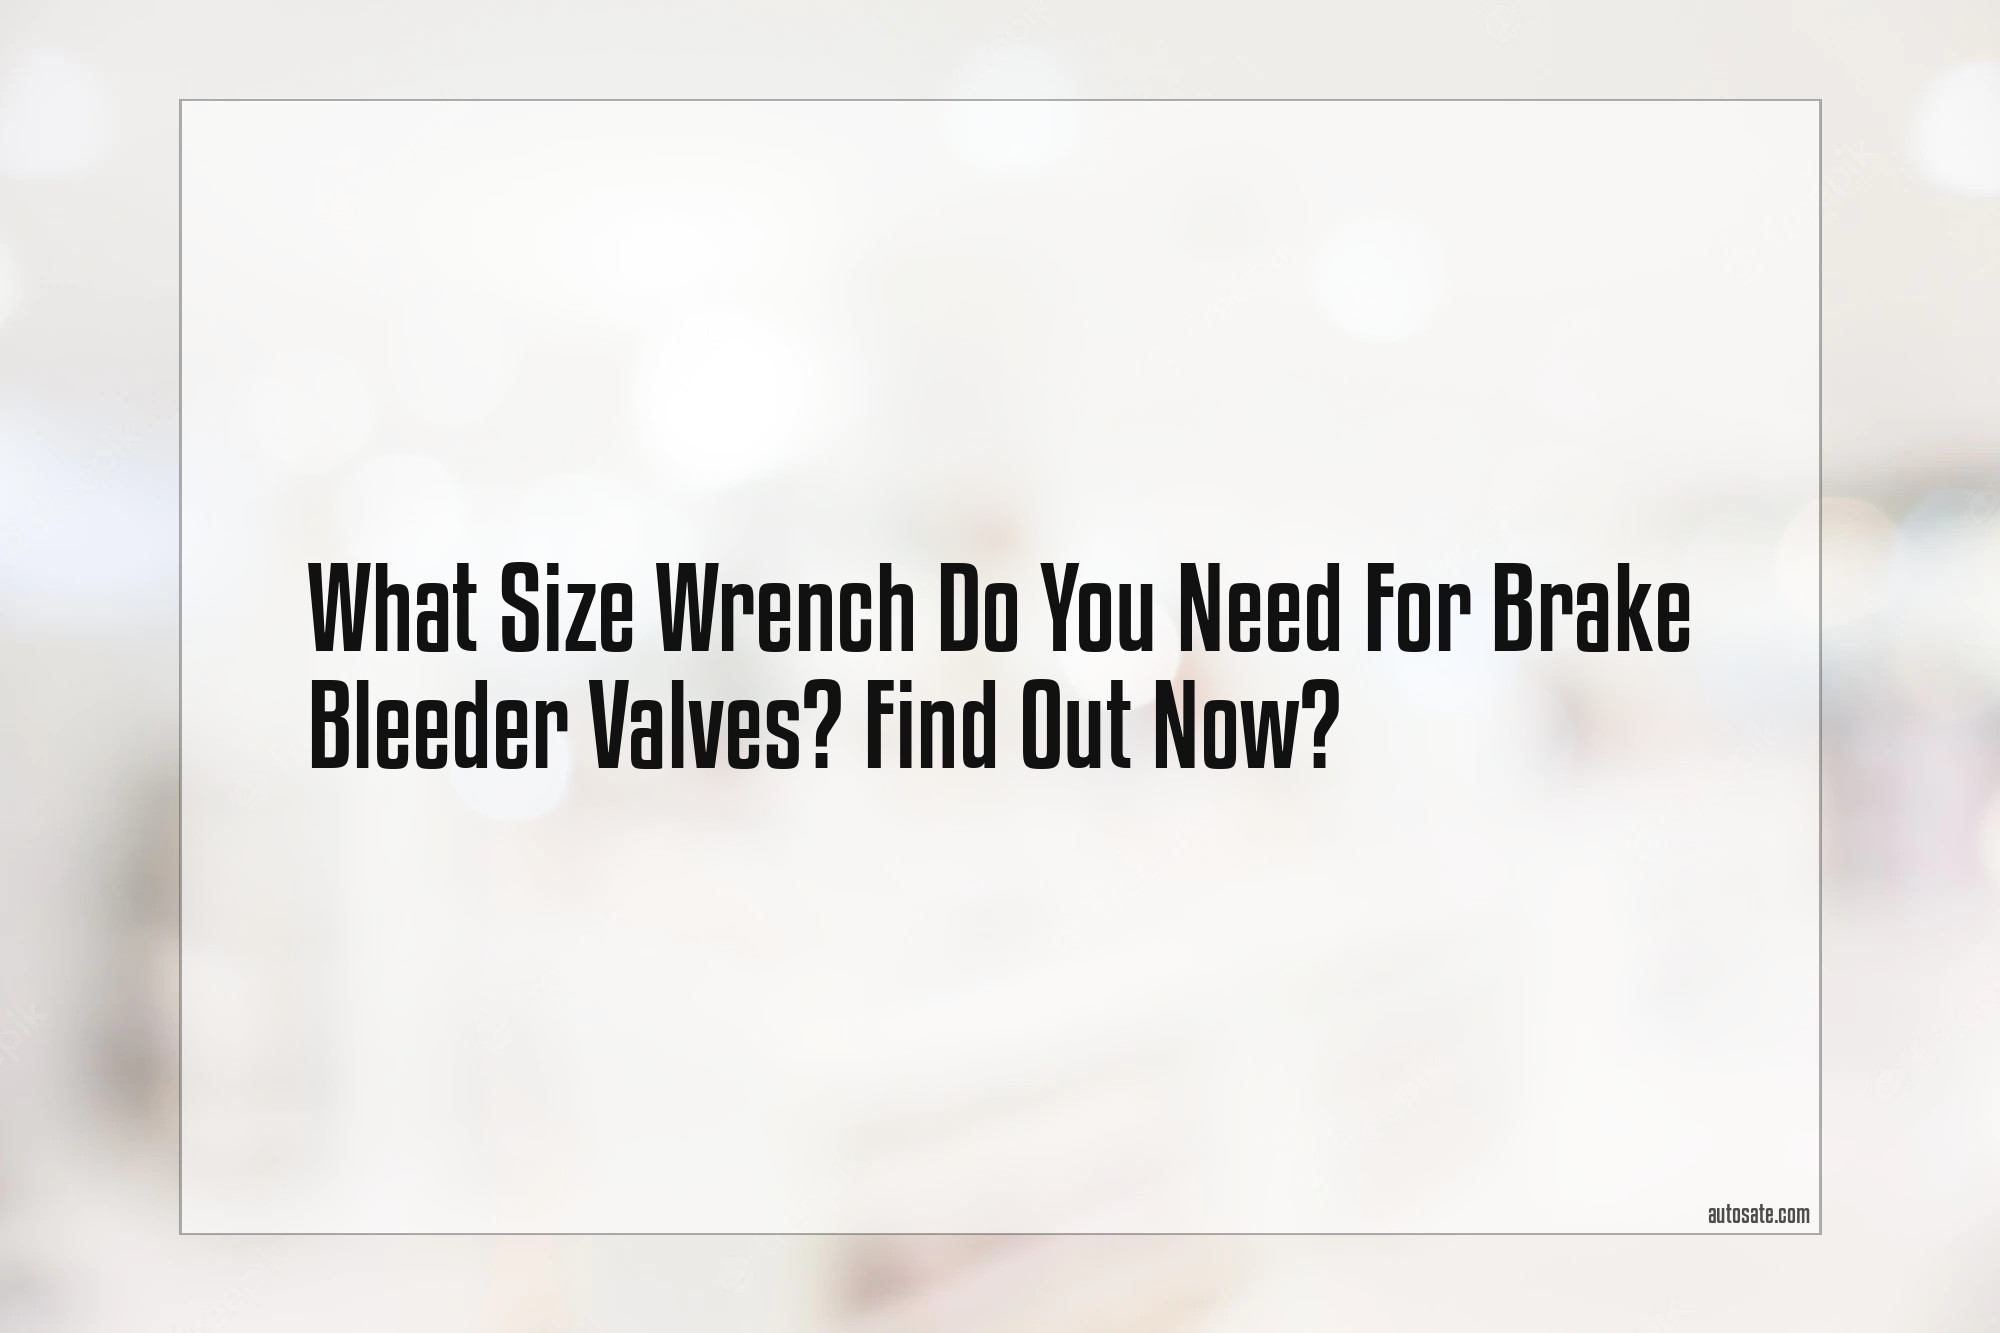 What Size Wrench Do You Need For Brake Bleeder Valves? Find Out Now